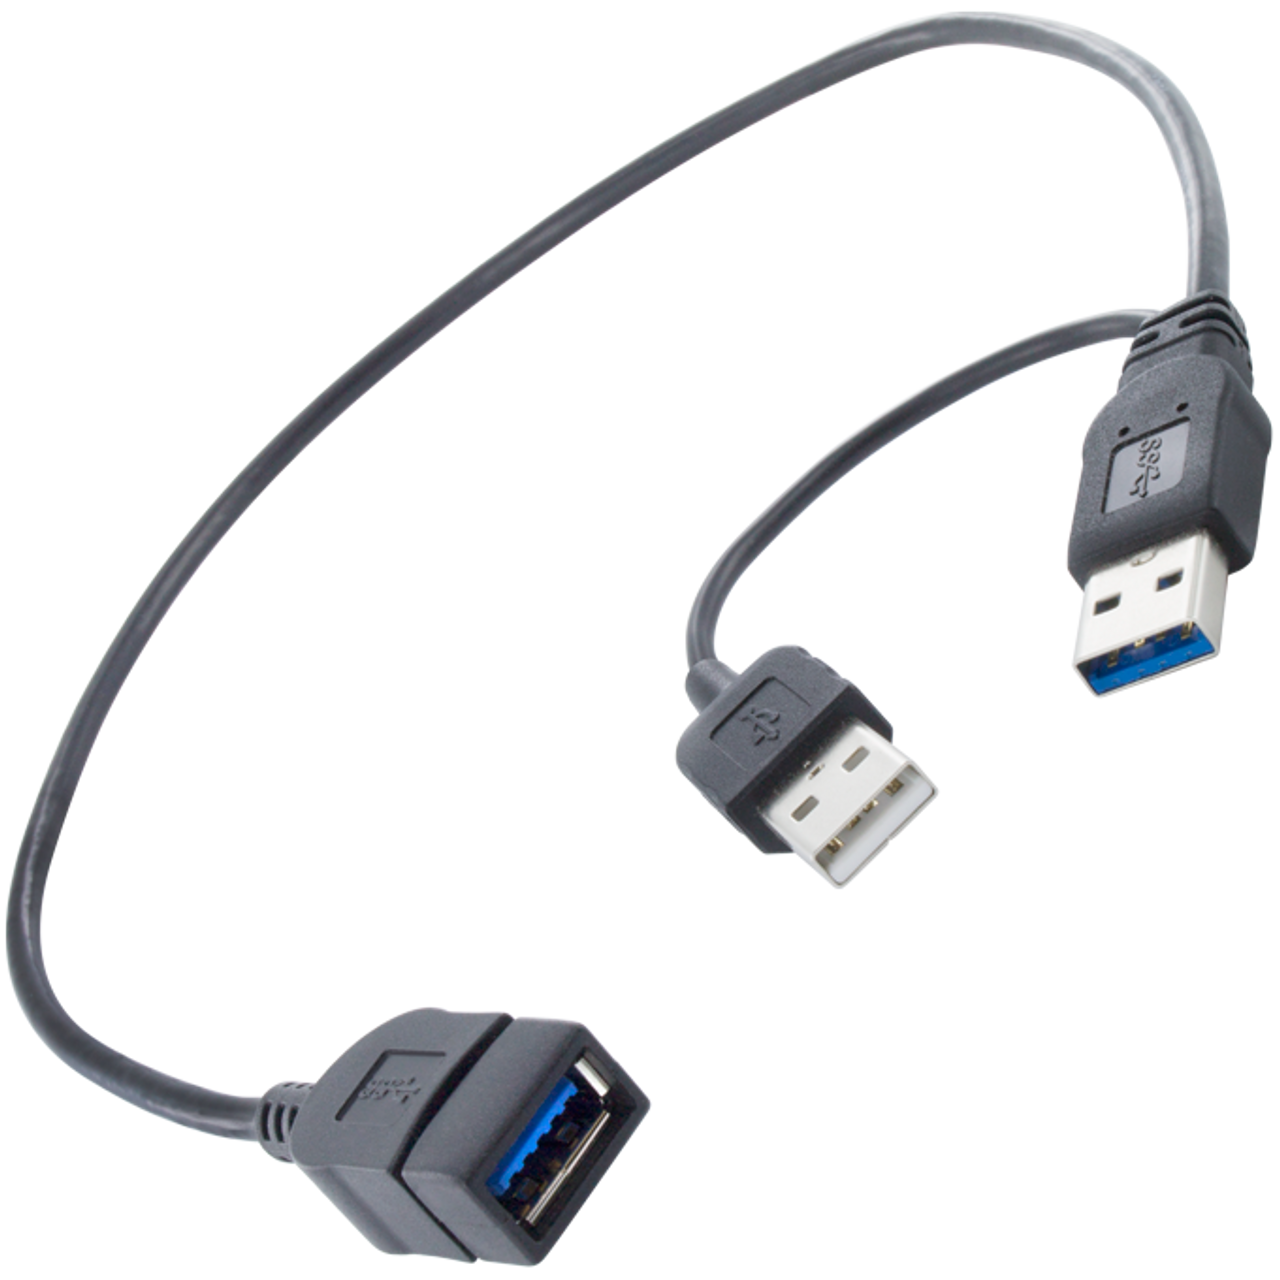 USB3 Power Adapter Y-Cable Apricorn